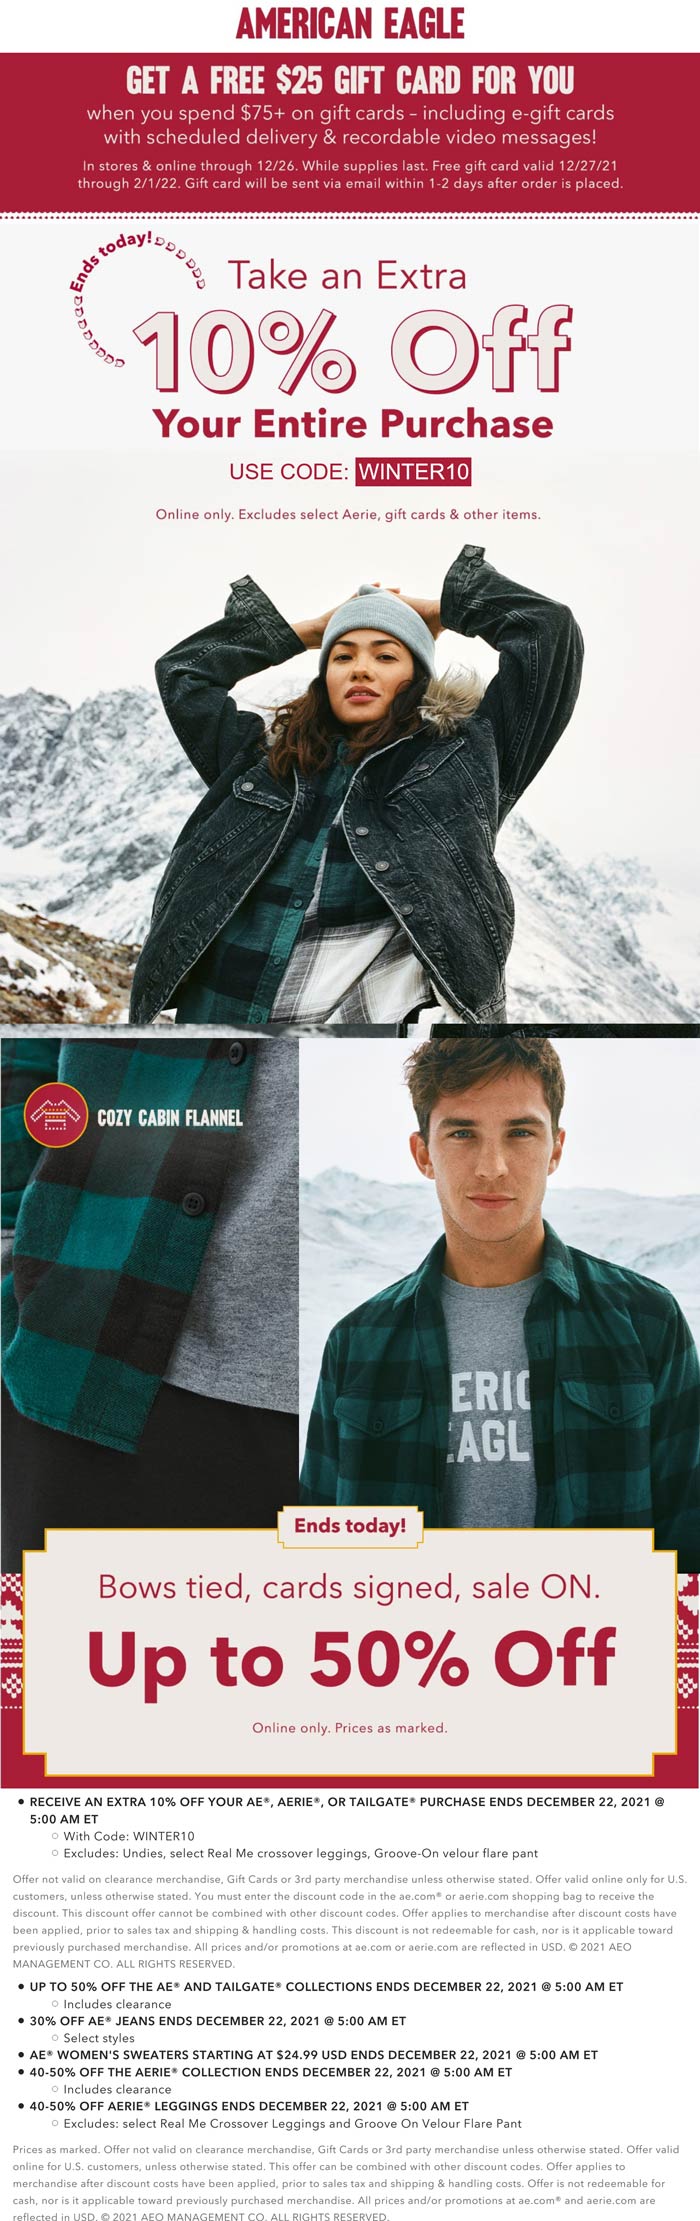 American Eagle stores Coupon  10-50% off today at American Eagle via promo code WINTER10 #americaneagle 